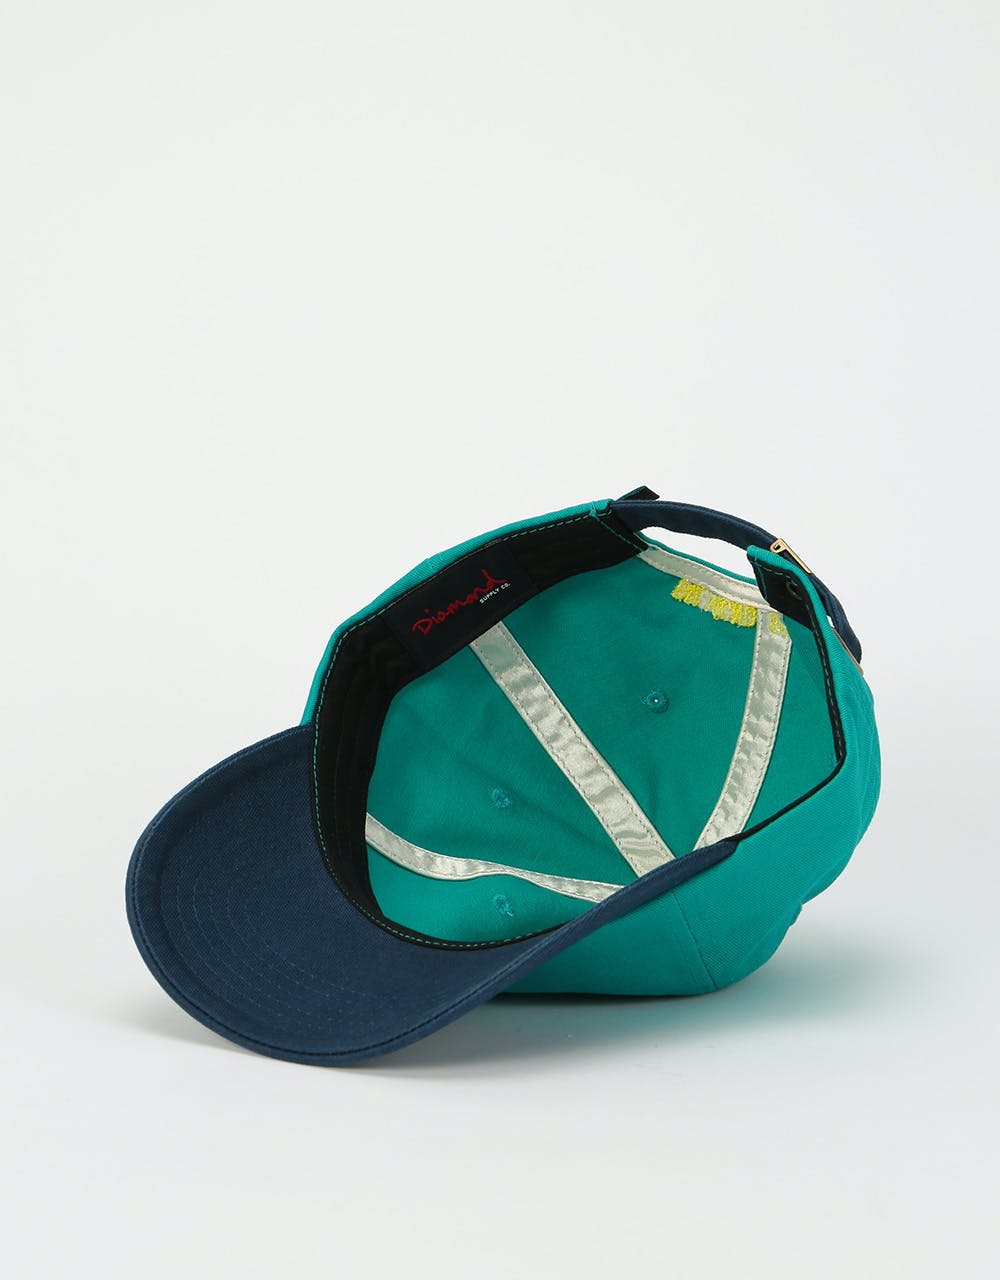 Diamond Supply Co. Brilliant Patch Sports Cap - Teal